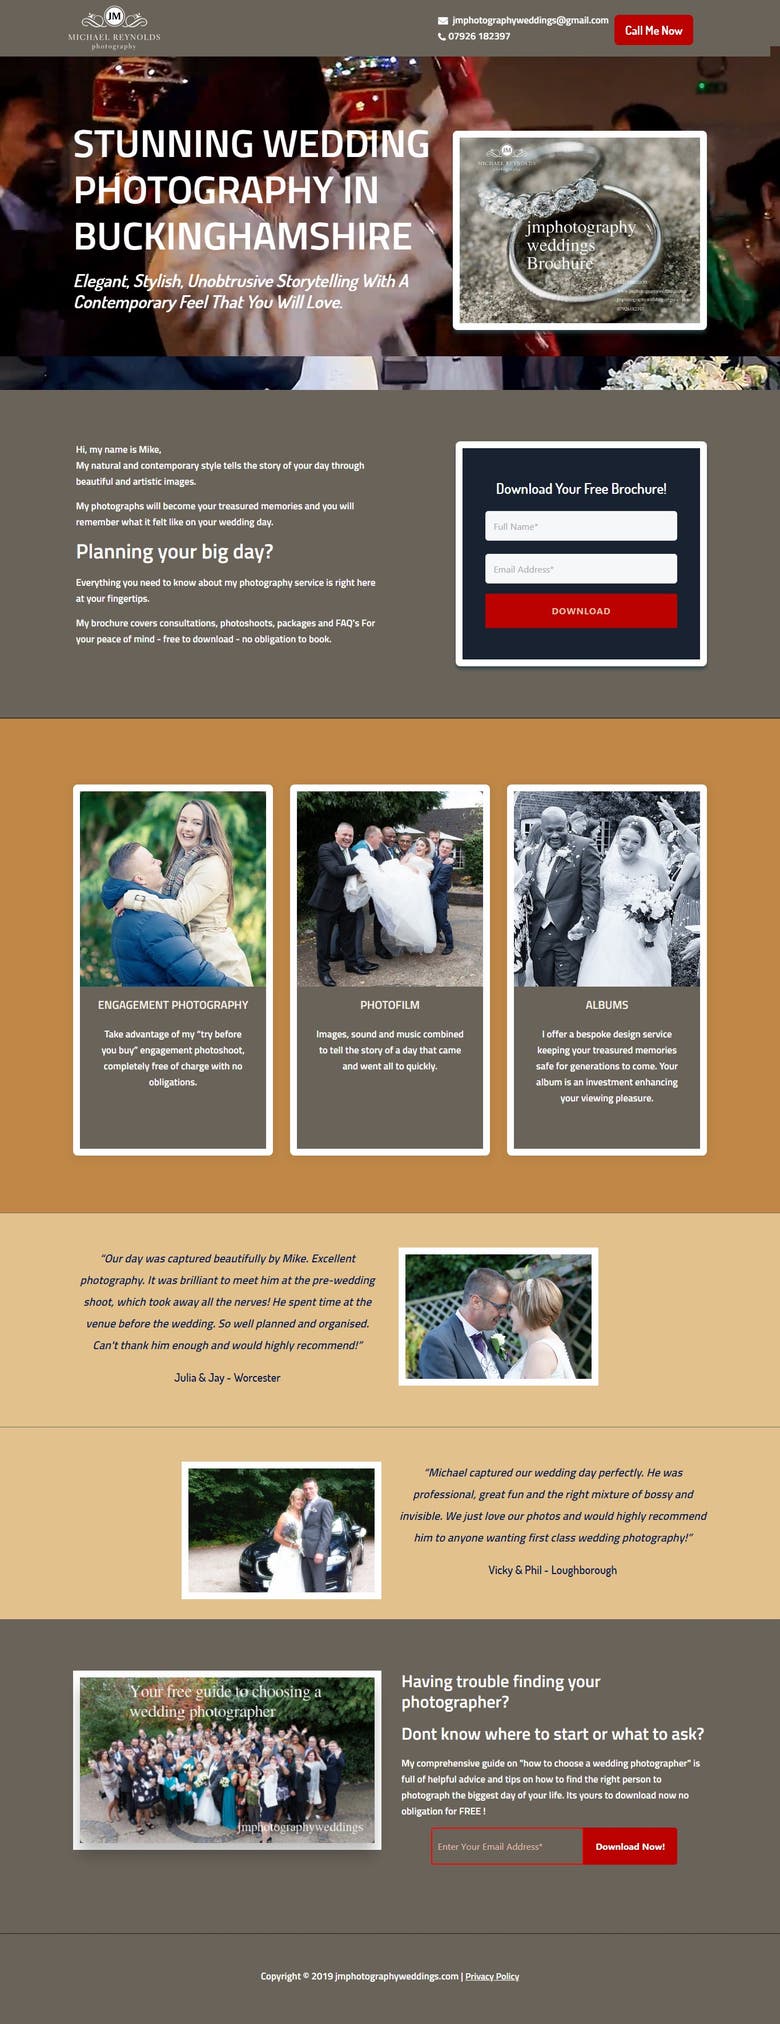 Landing Page for WeddingPhotography